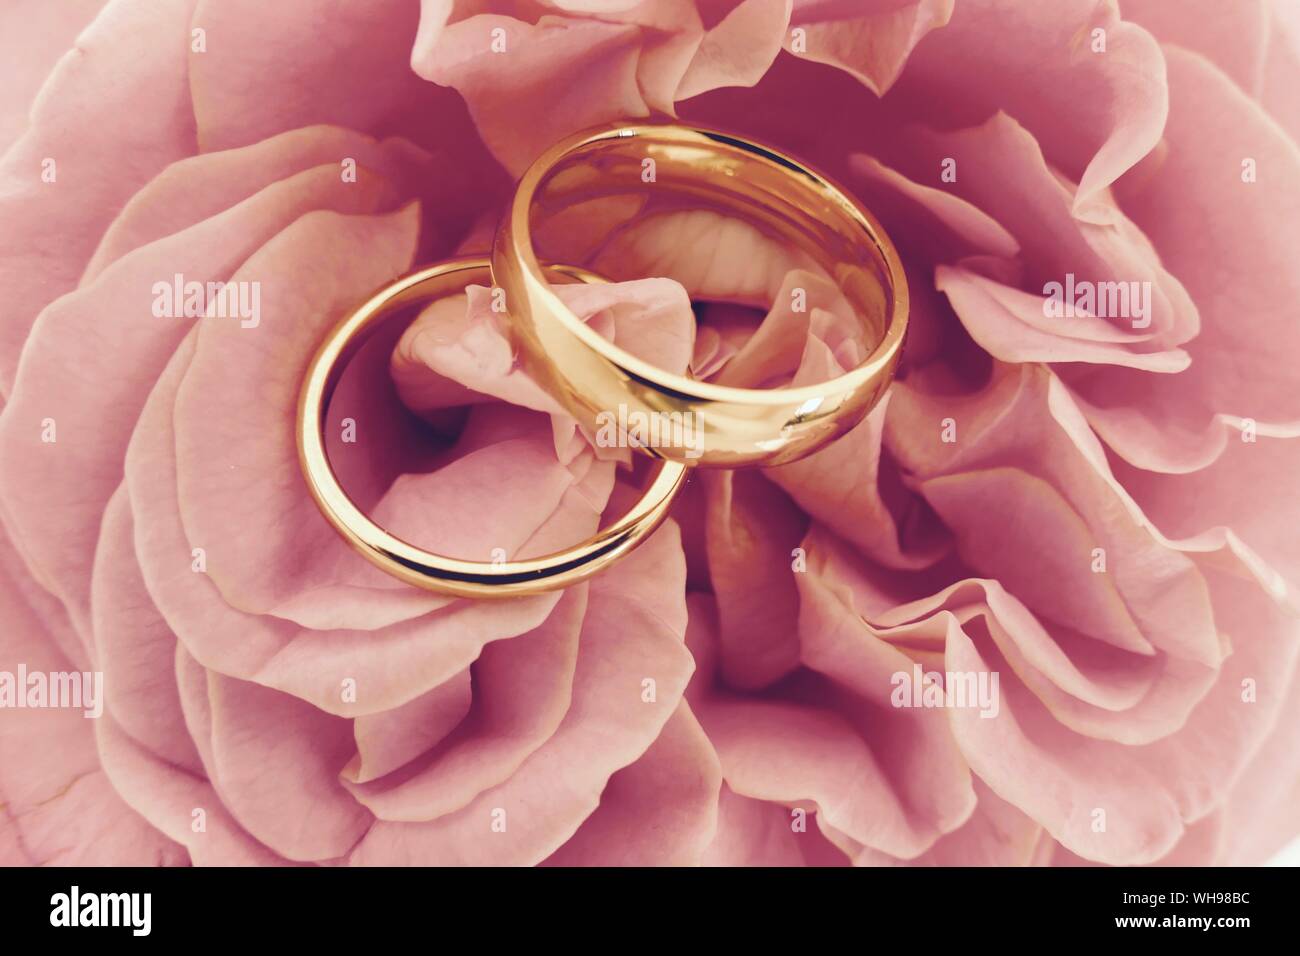 High Angle View Of Engagement Rings On Rose Stock Photo